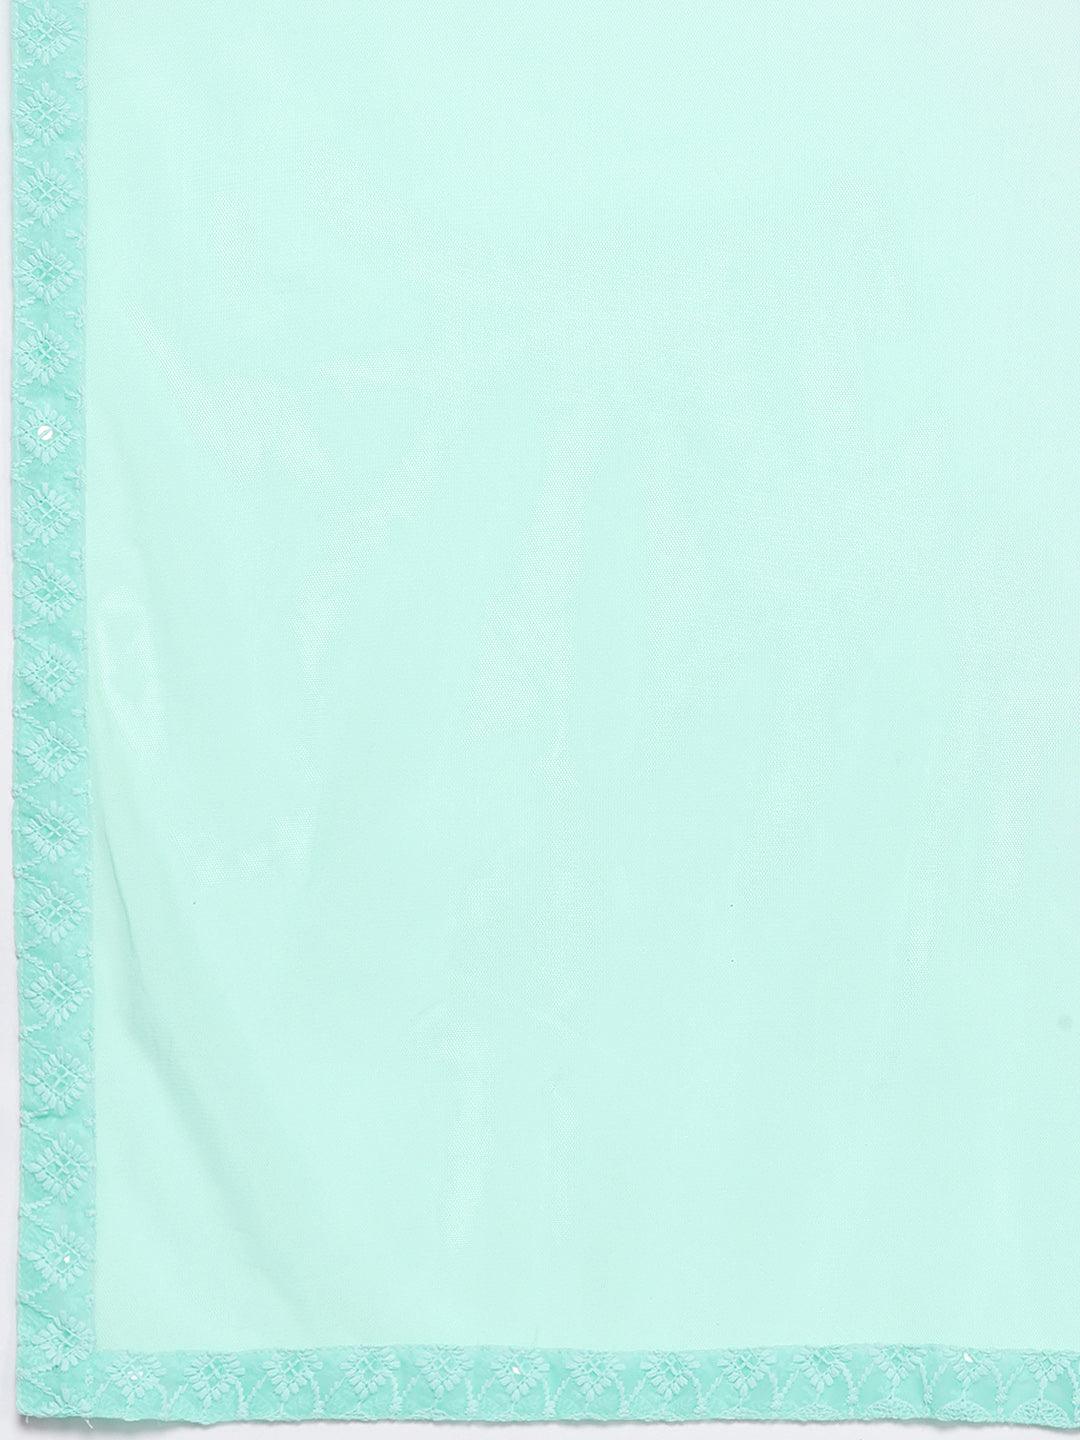 Sea Green Embroidered Georgette Straight Kurta With Trousers & Dupatta - Libas